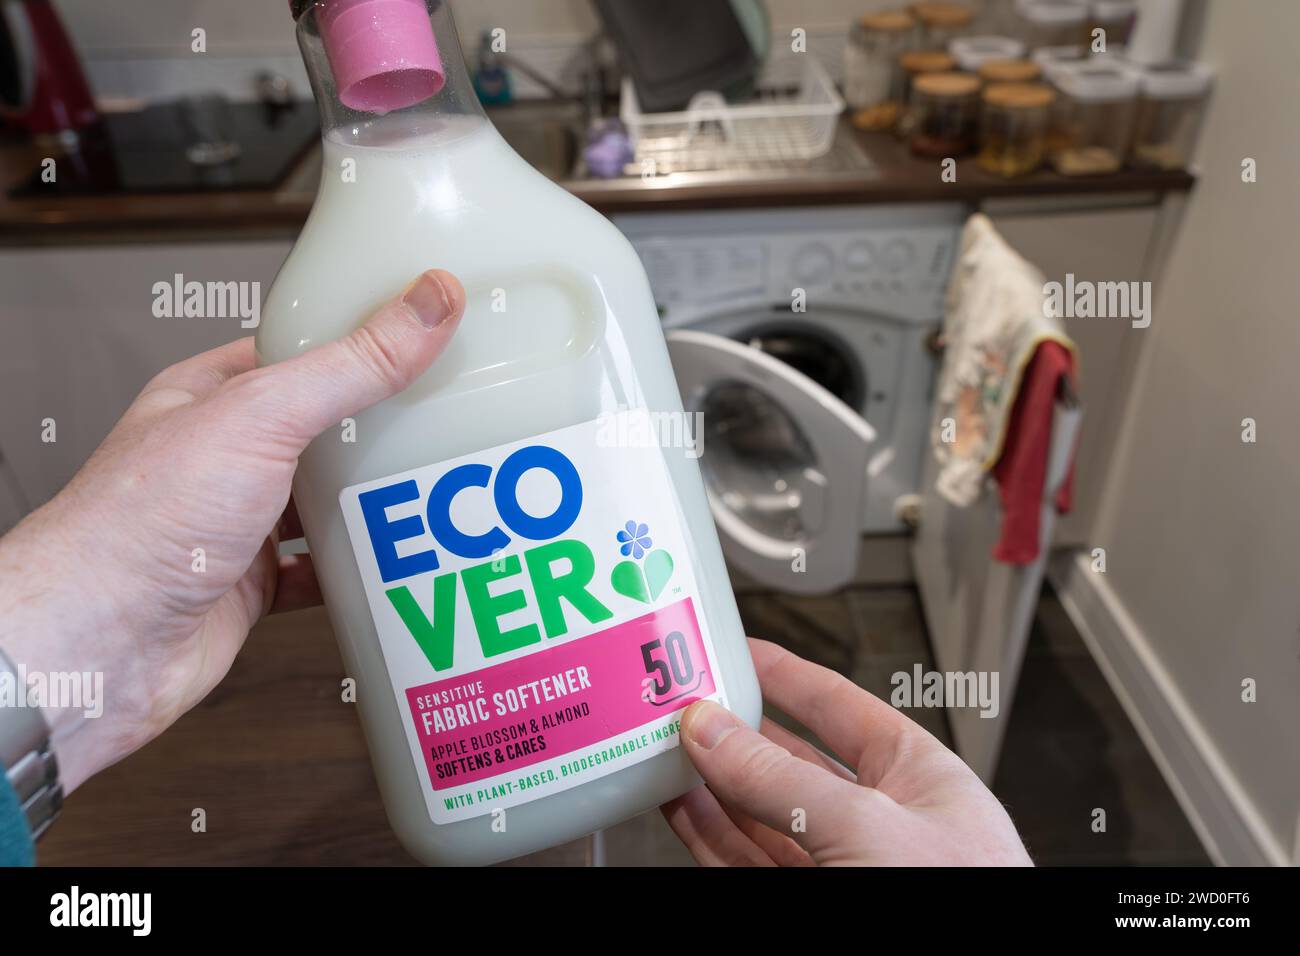 Hands holding a bottle of environmentally friendly fabric softener with plant based biodegradable ingredients by Ecover, a Belgian company. UK Stock Photo